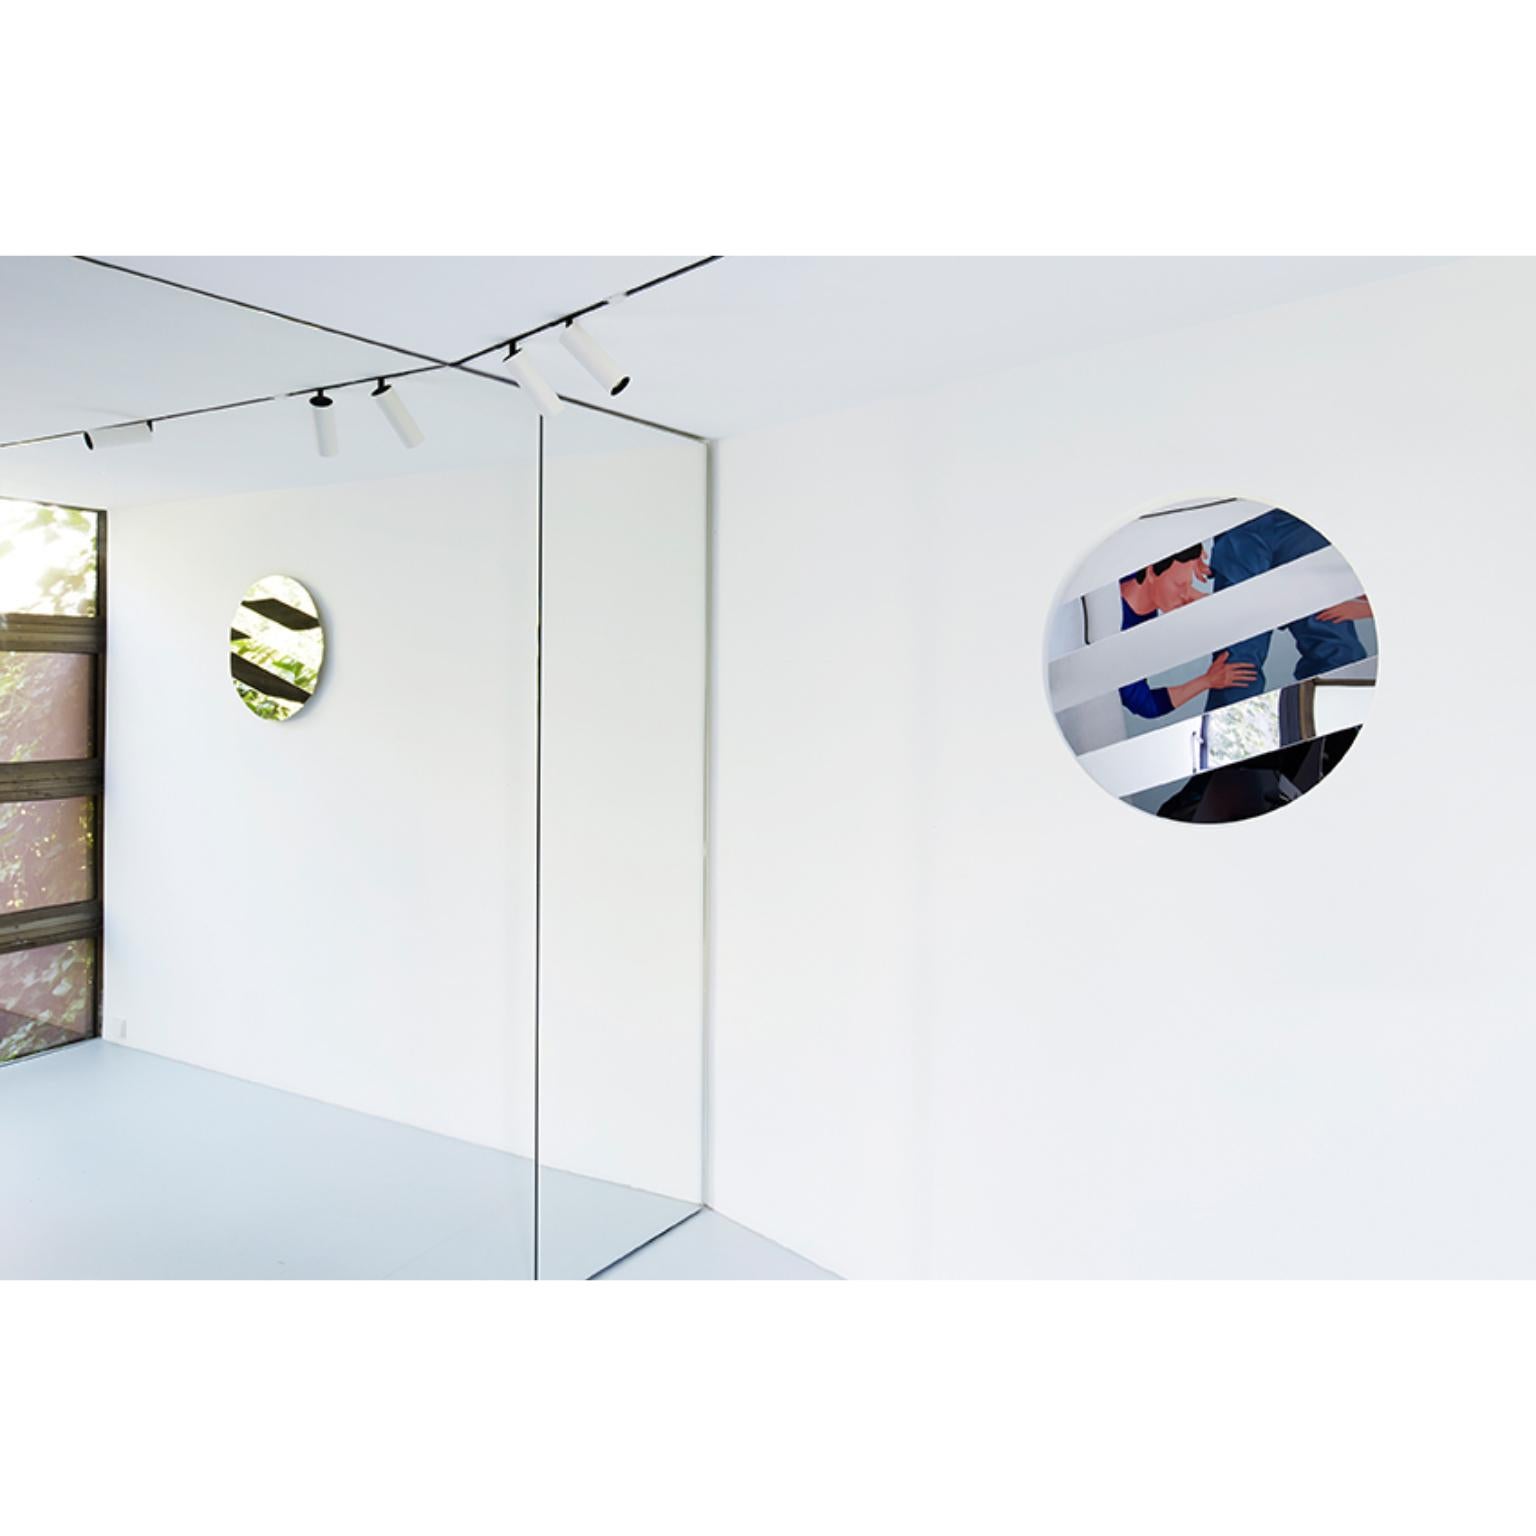 Stripe Mirror 120 Circle by Sebastian Scherer
Dimensions: ø : 120 
Materials: Mirror Stainless Steel, Wooden Bracket
Different sizes are available. Square version available.

The STRIPE wall mirror creates a fascinating graphic effect: the minimally